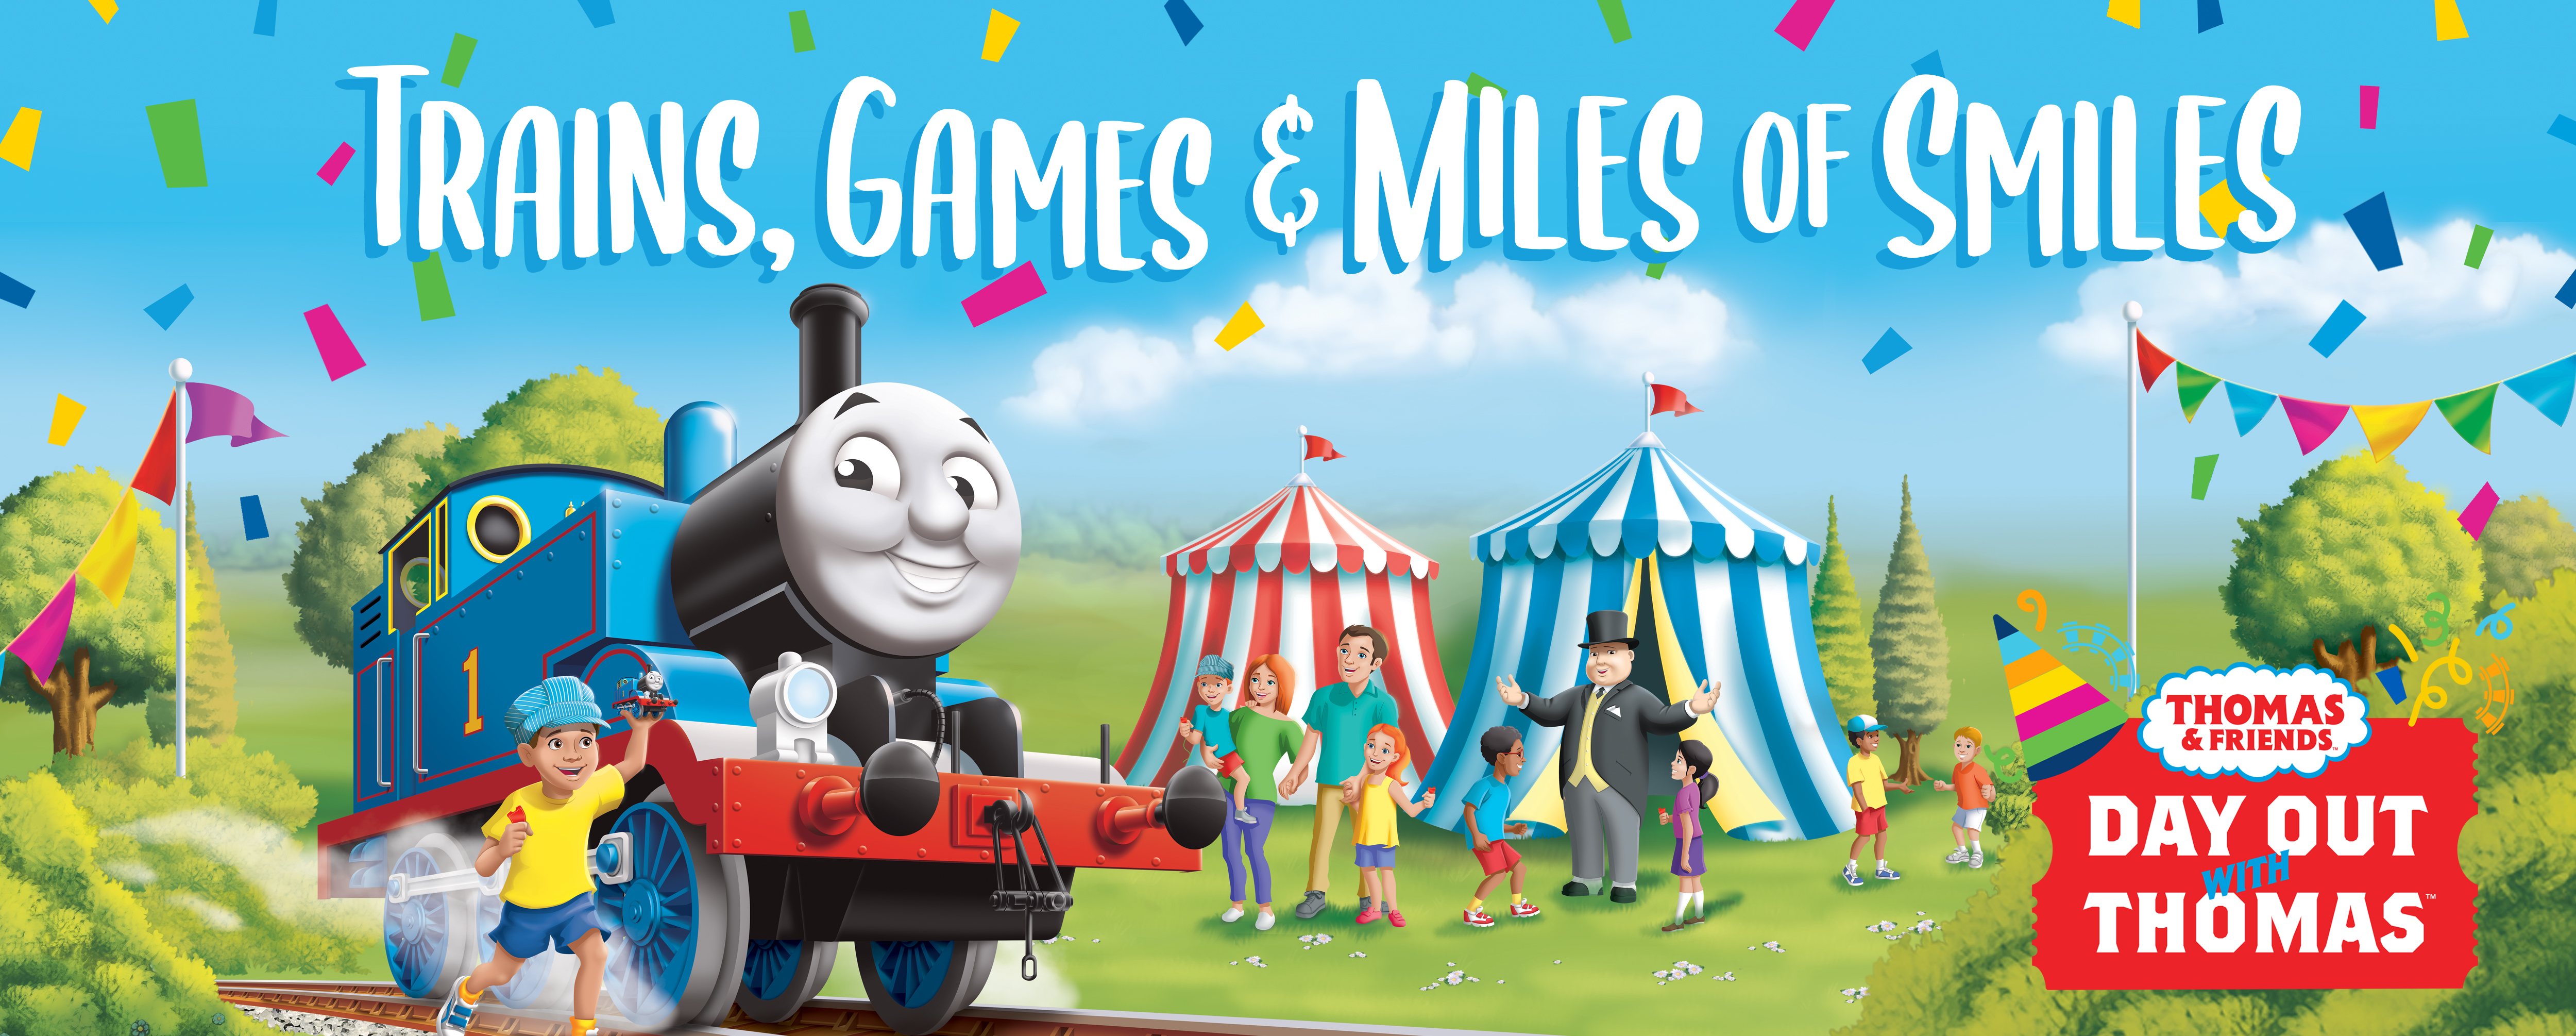 Trains, Games, and Miles of Smiles!